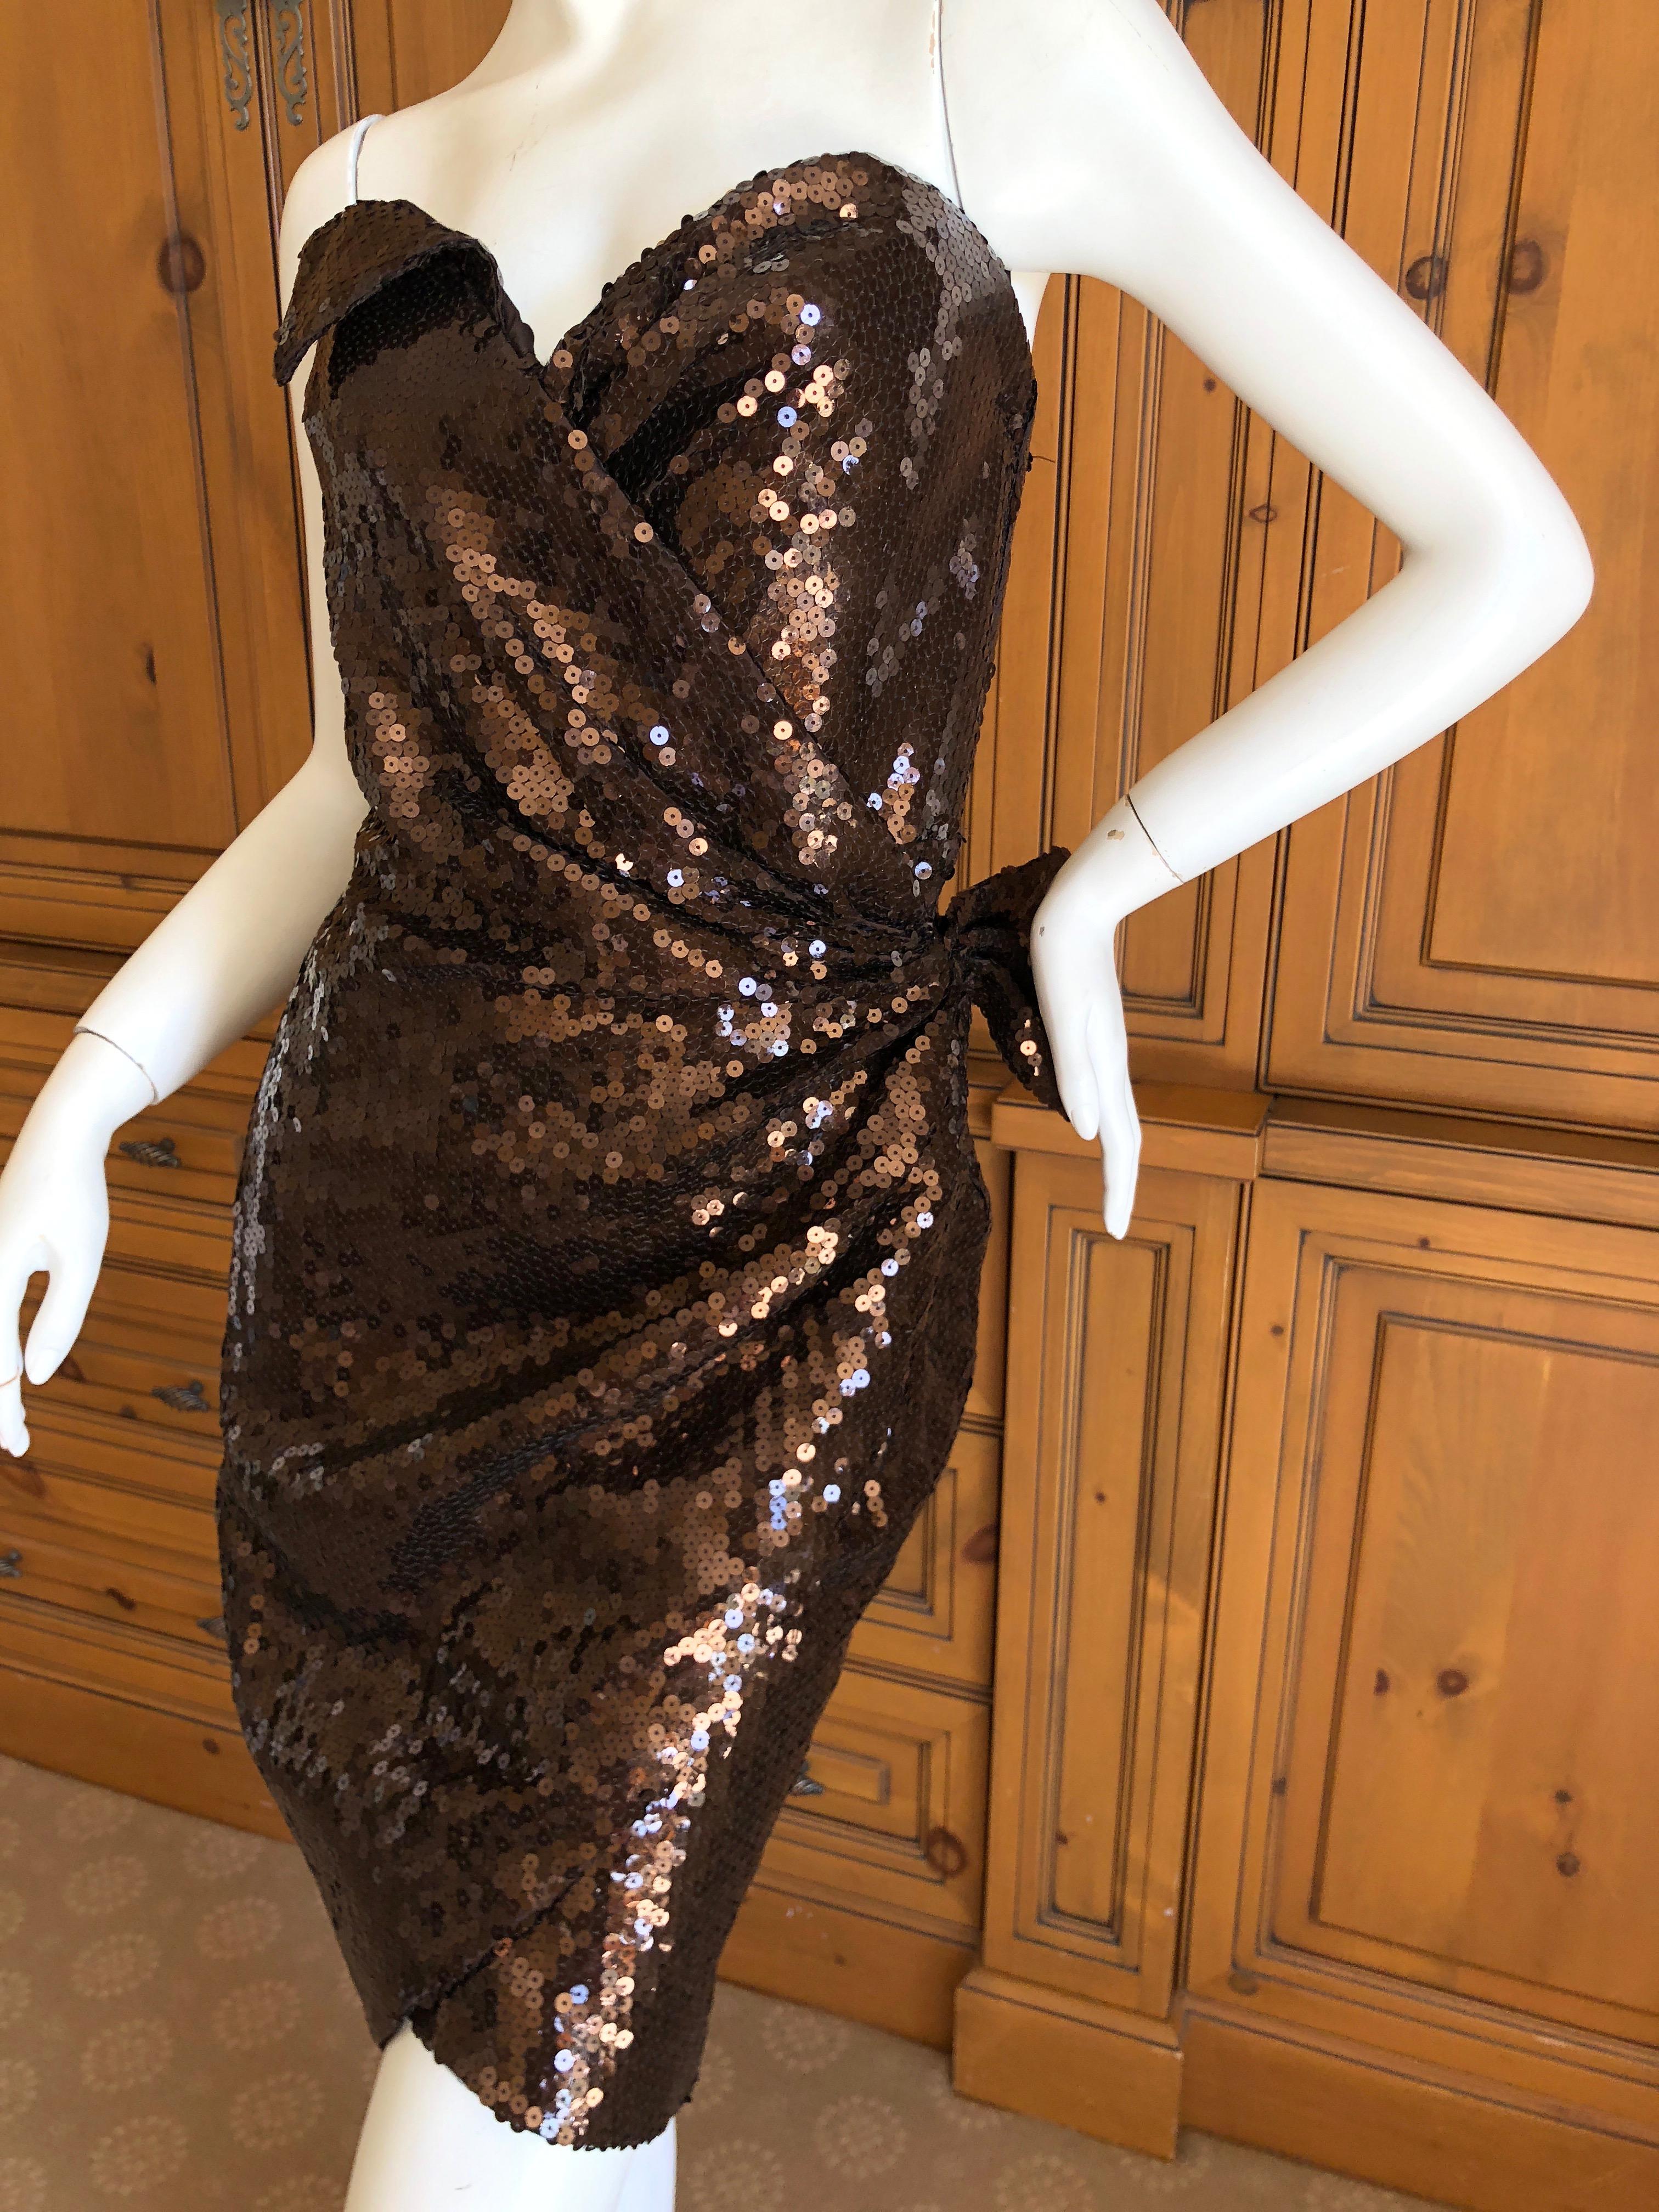 Thierry Mugler Vintage 80's brown sequin cocktail dress
So pretty, so Mugler. 
Wear it to the opening of the Thierry Mugler exhibit at the Montreal Museum  of Fine Arts in February 2019  
 Size 40
  Bust 36